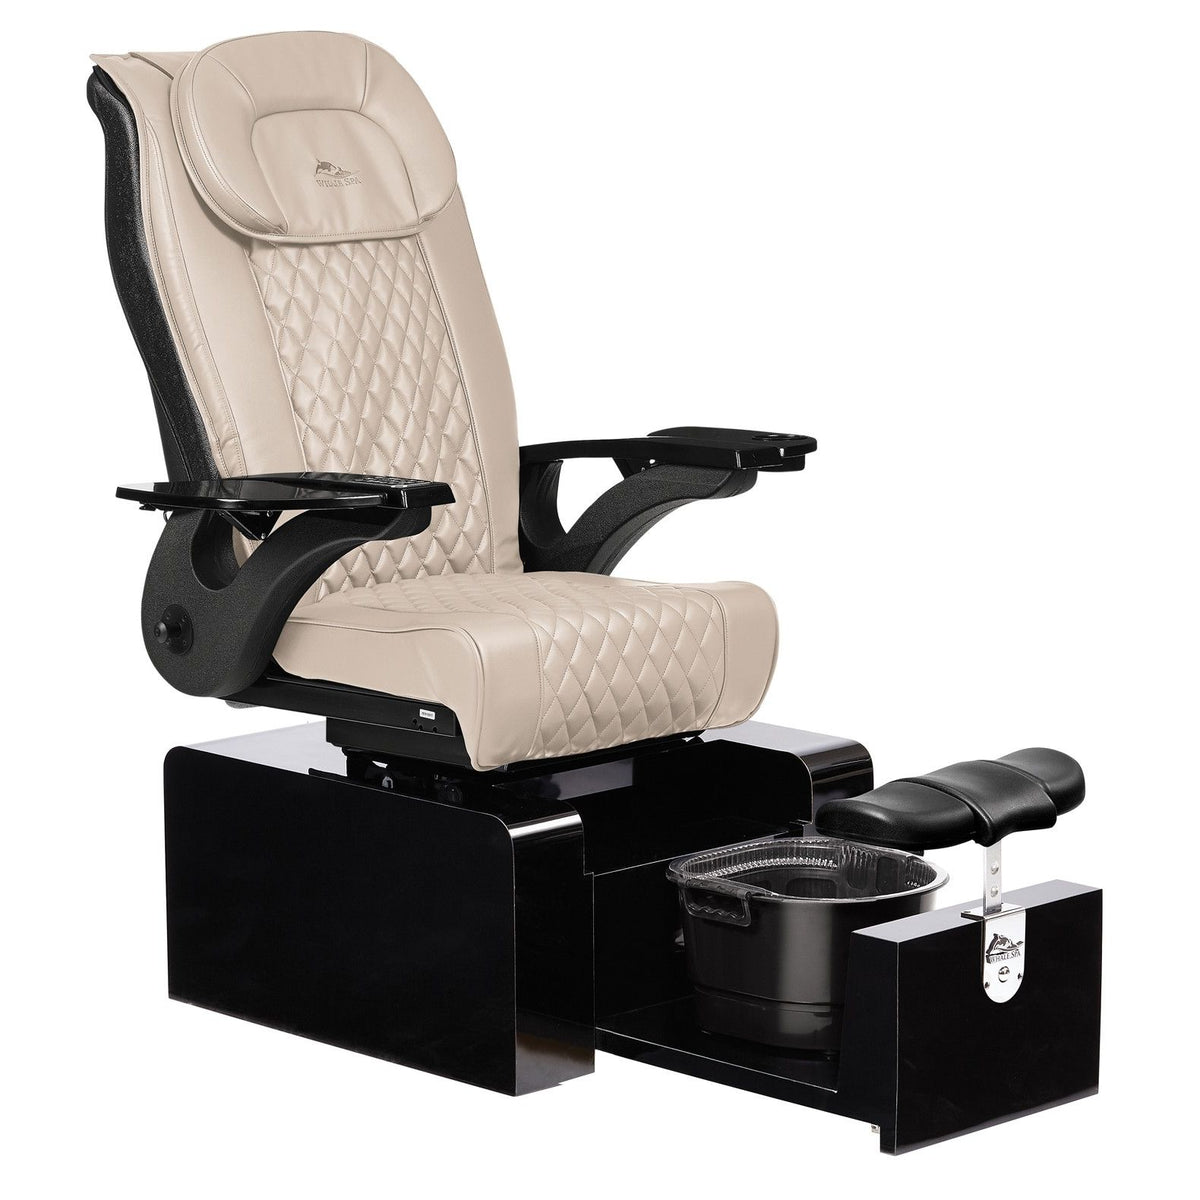 Whale Spa Whale Spa Pure - Portable No Plumbing Portable Spa &amp; Pedicure Chair with Free Trolley &amp; Tech Stool Pedicure Chair - ChairsThatGive